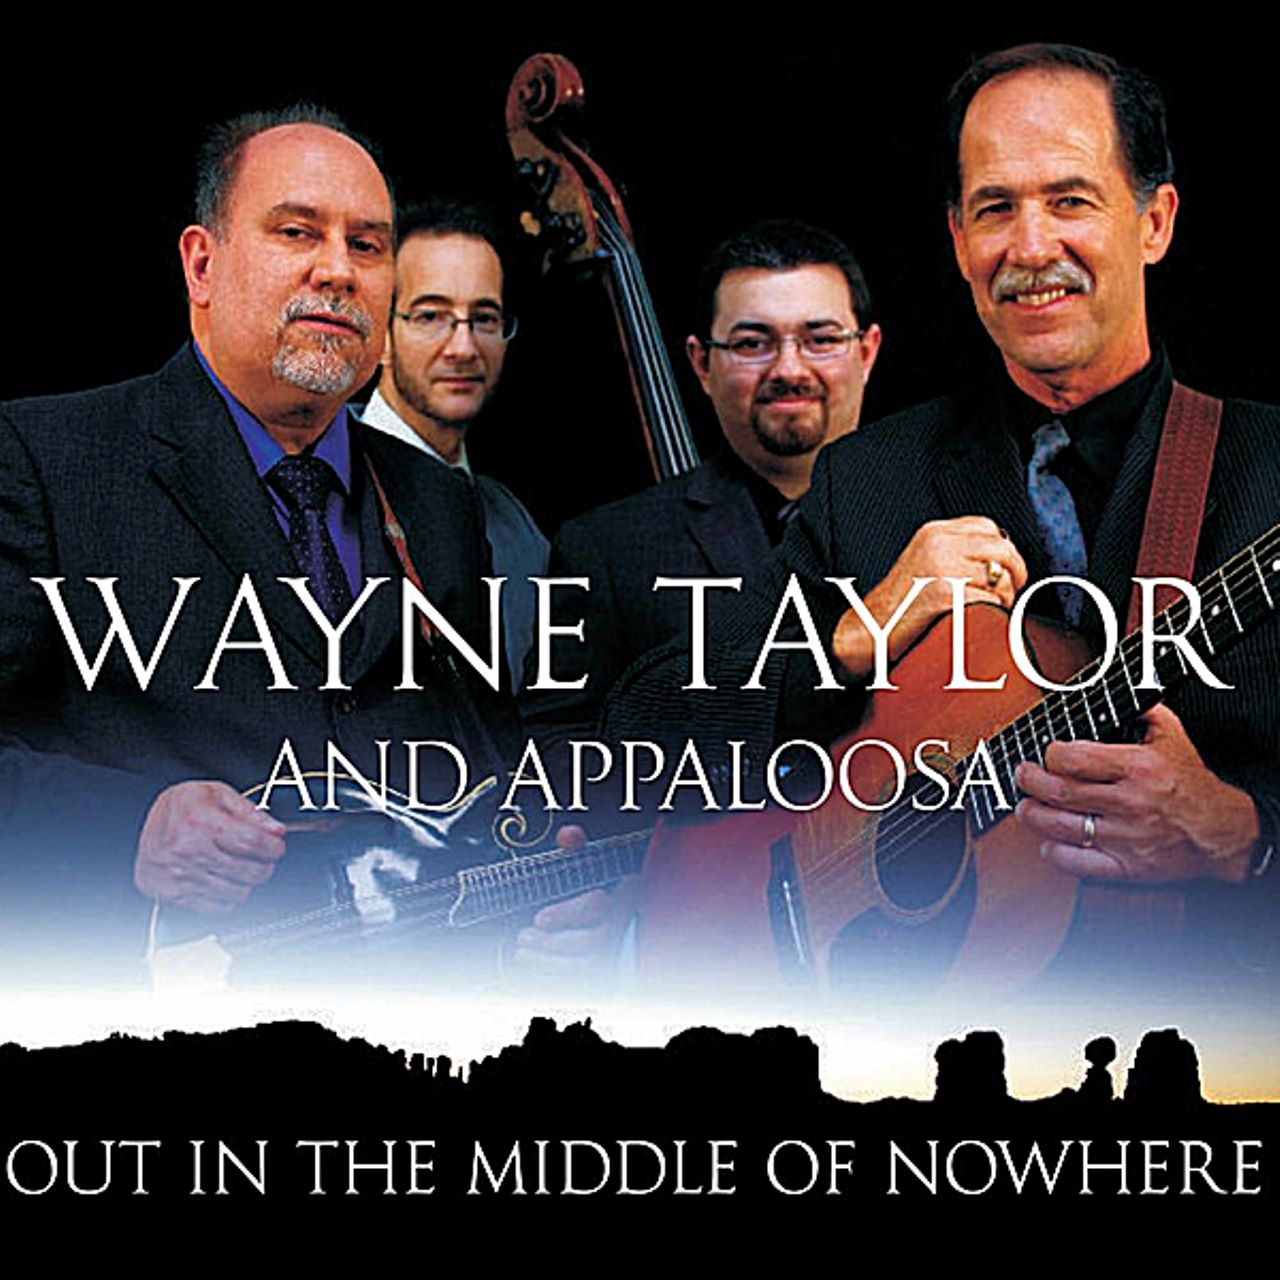 Wayne Taylor & Appaloosa - Out In The Middle Of Nowhere cover album